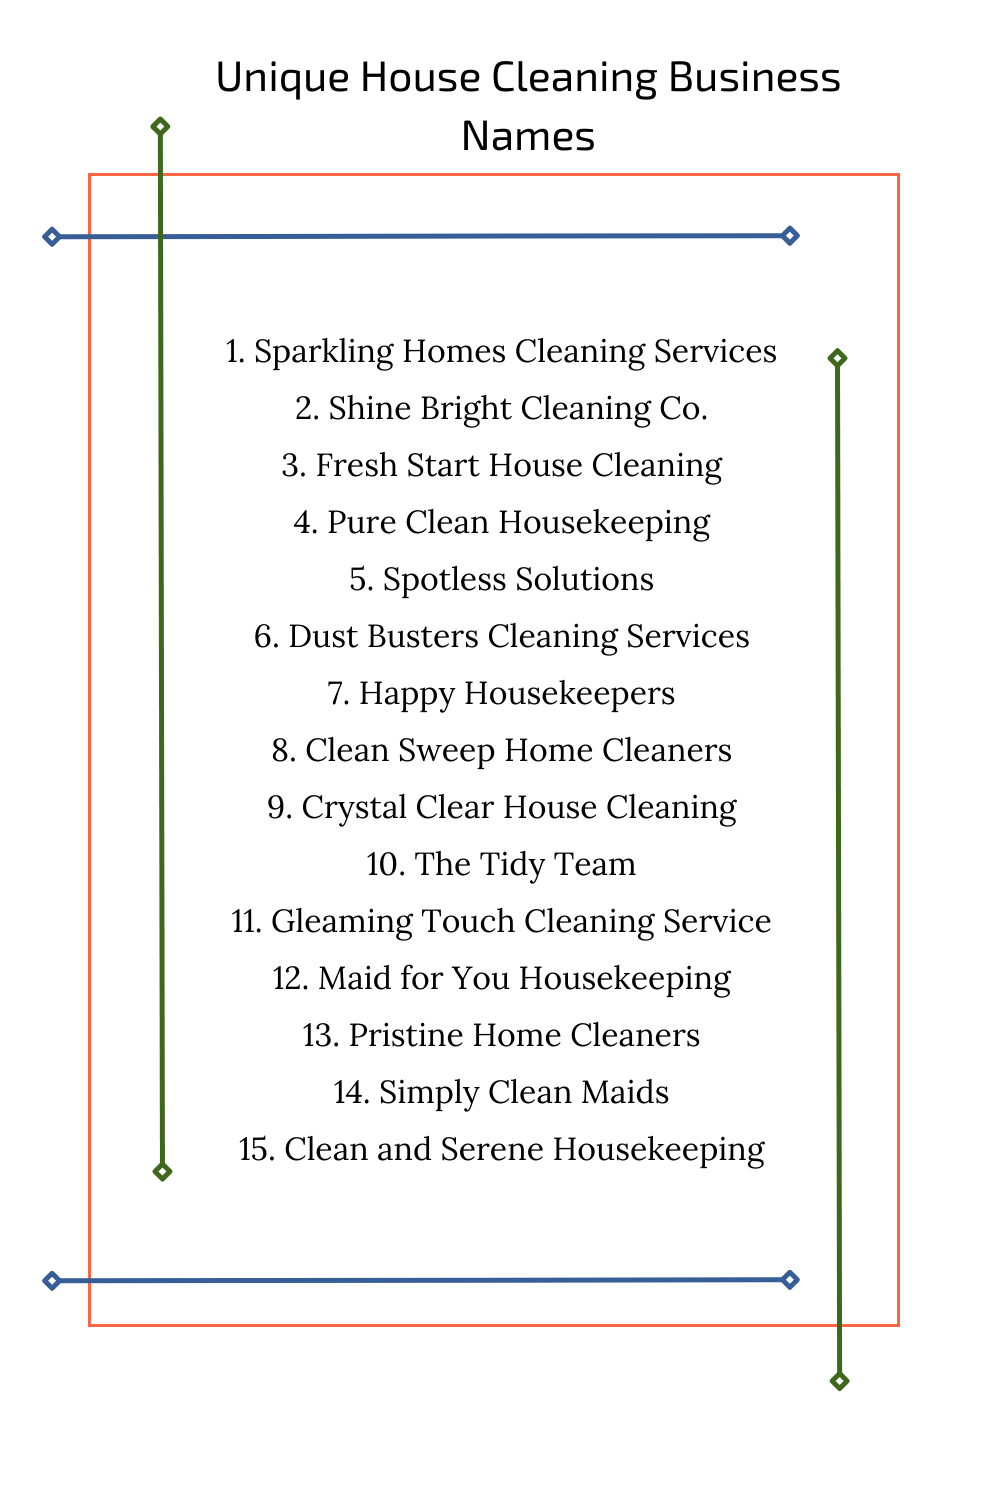 Unique House Cleaning Business Names